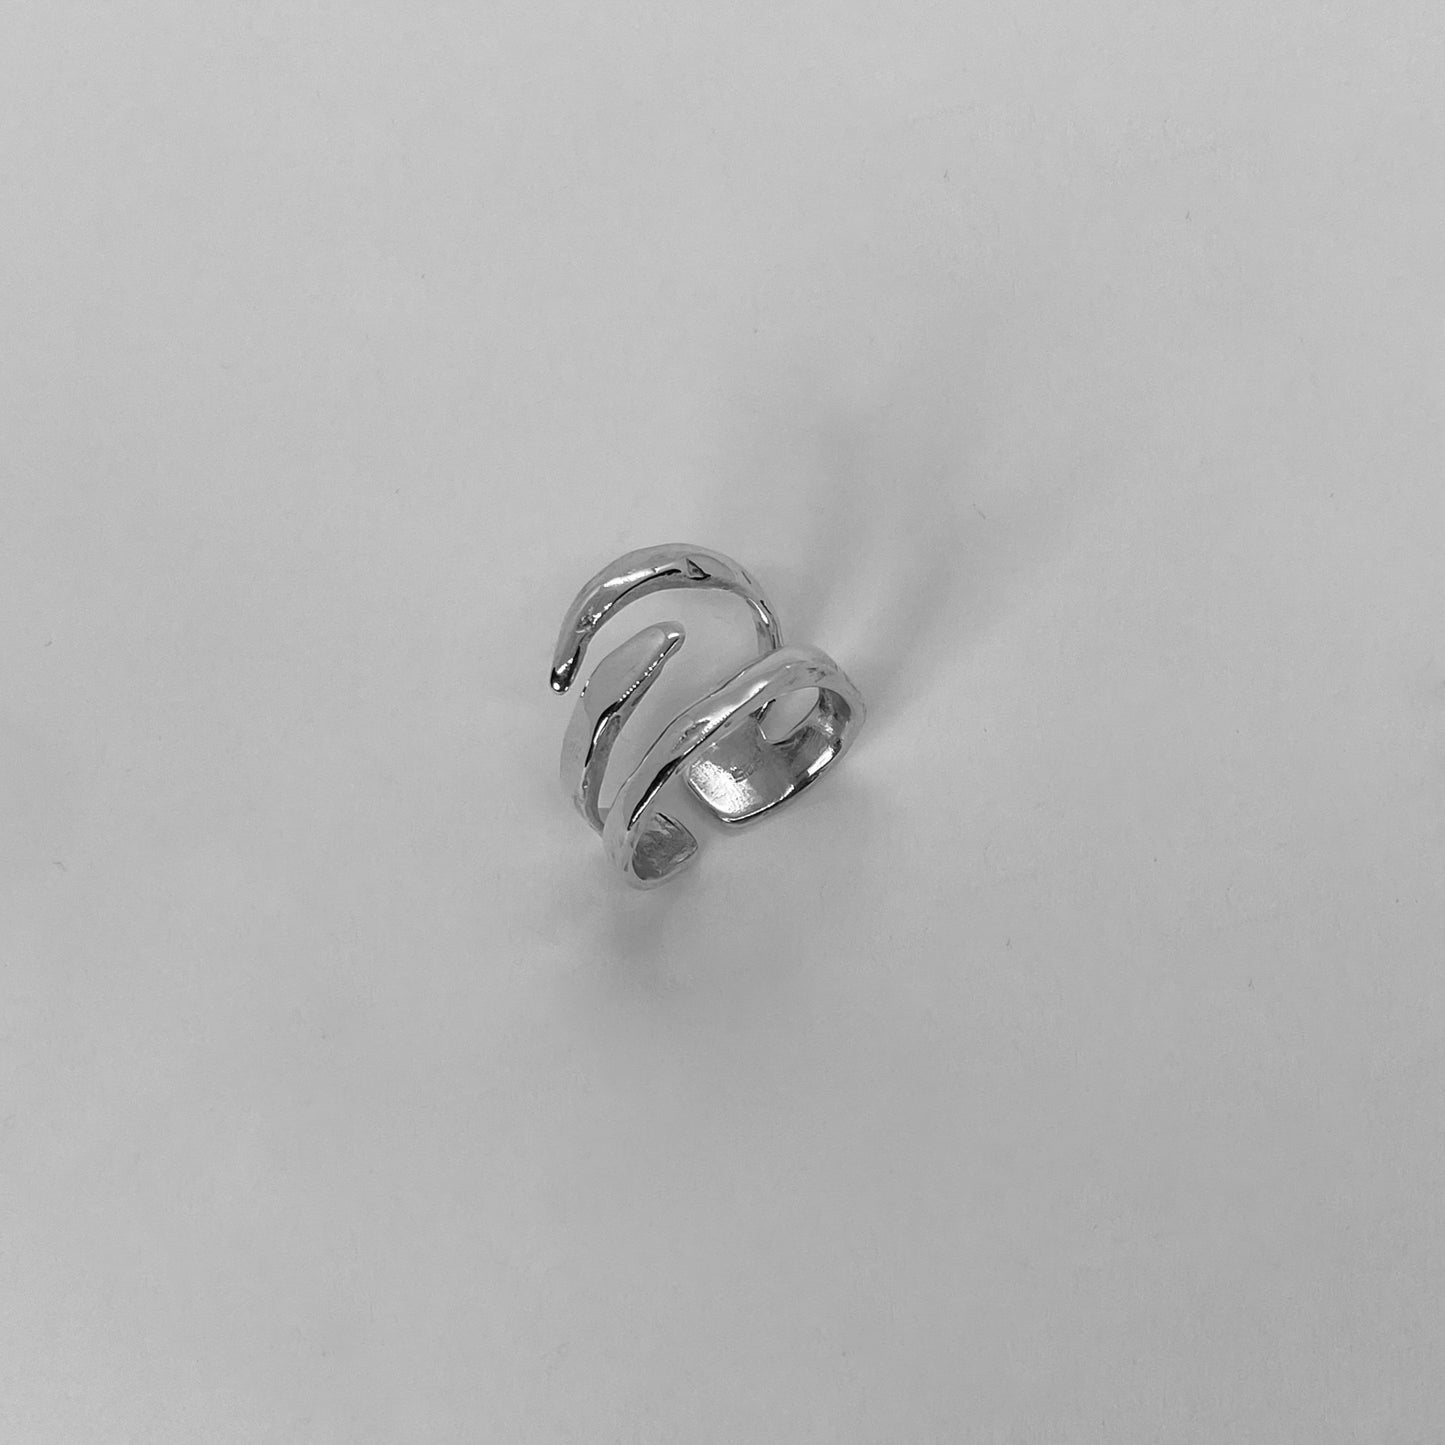 The Spinus ring is a handcrafted piece made of 925 sterling silver. It is composed of three silver bands and is smooth and glossy